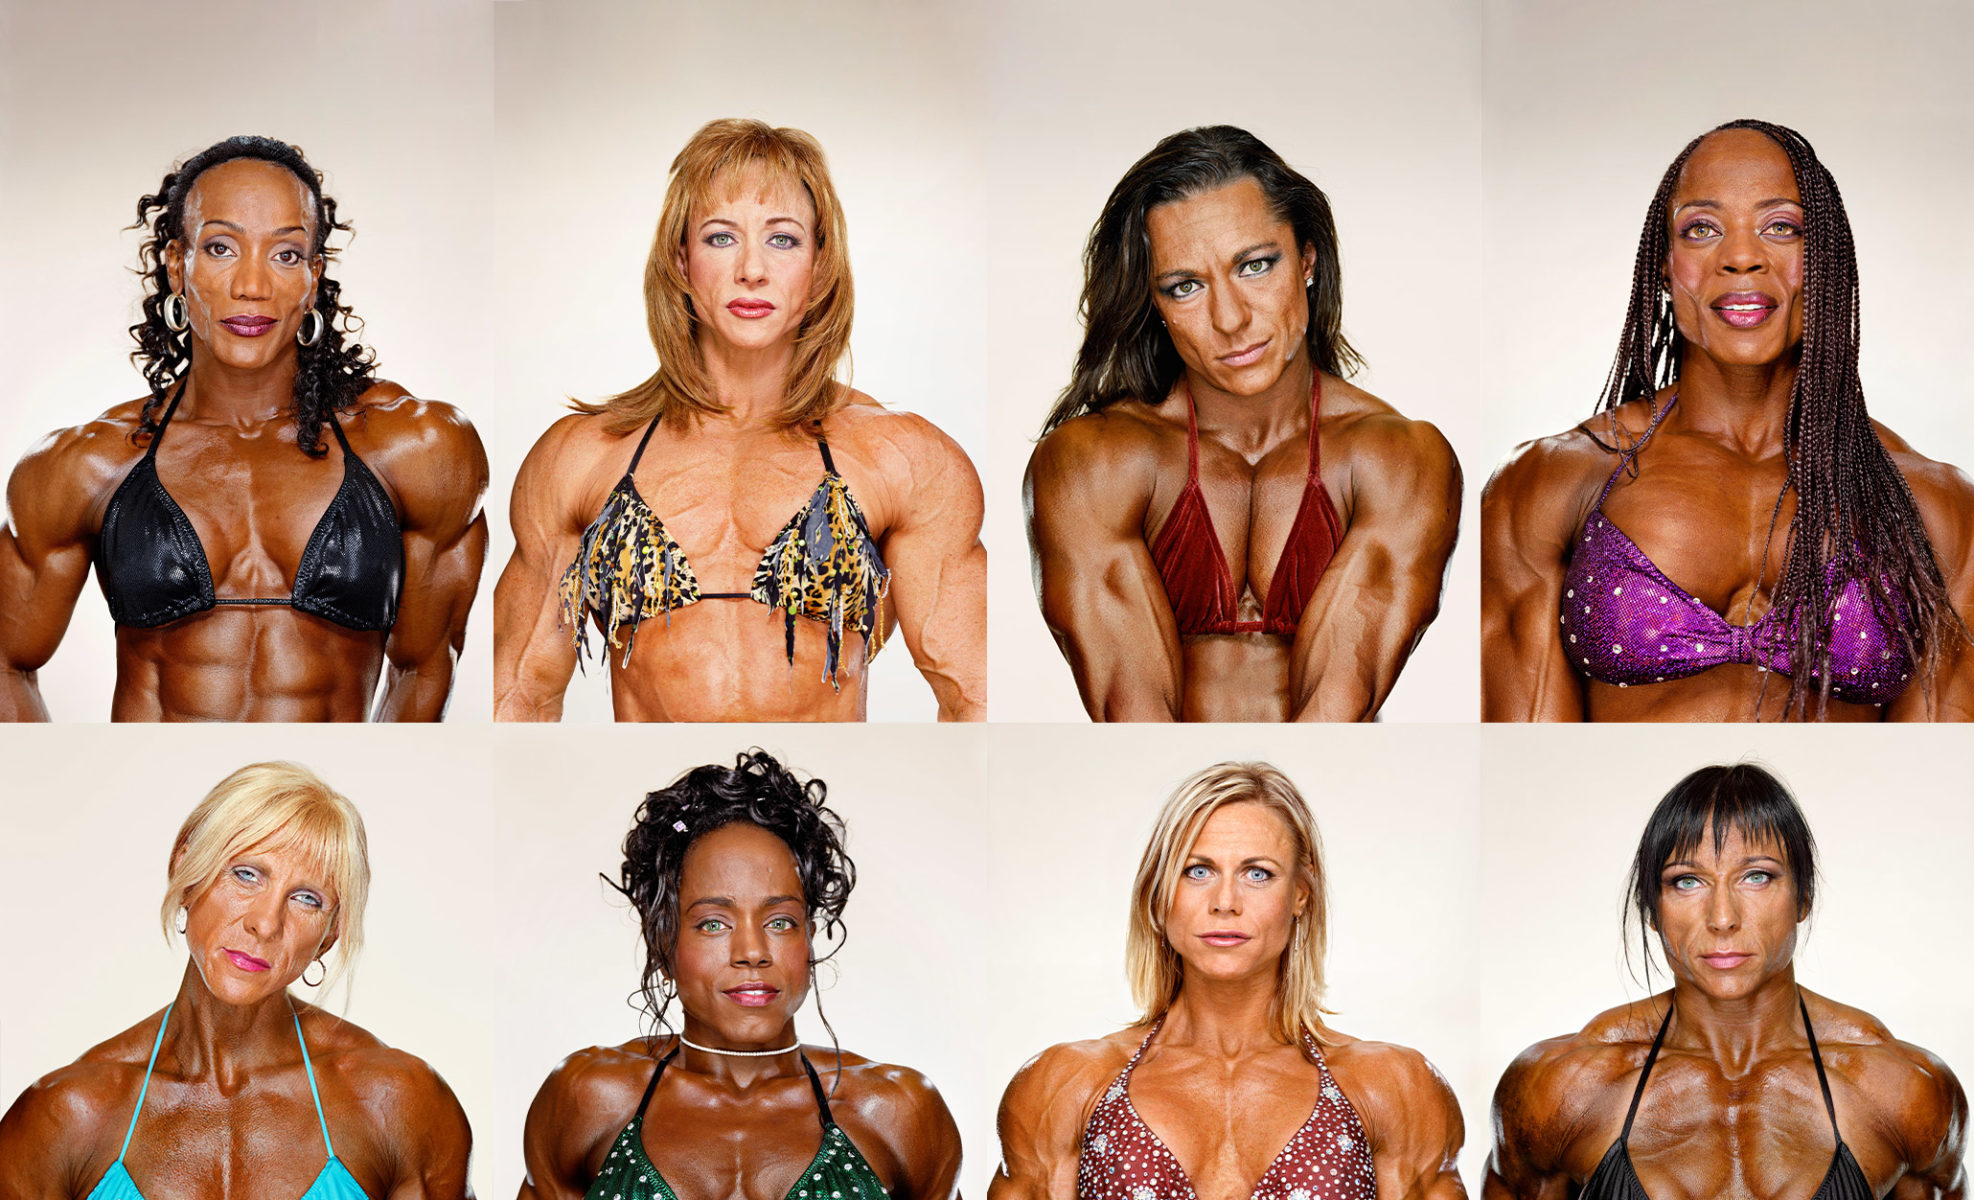 dawn belotti recommends images of women bodybuilders pic